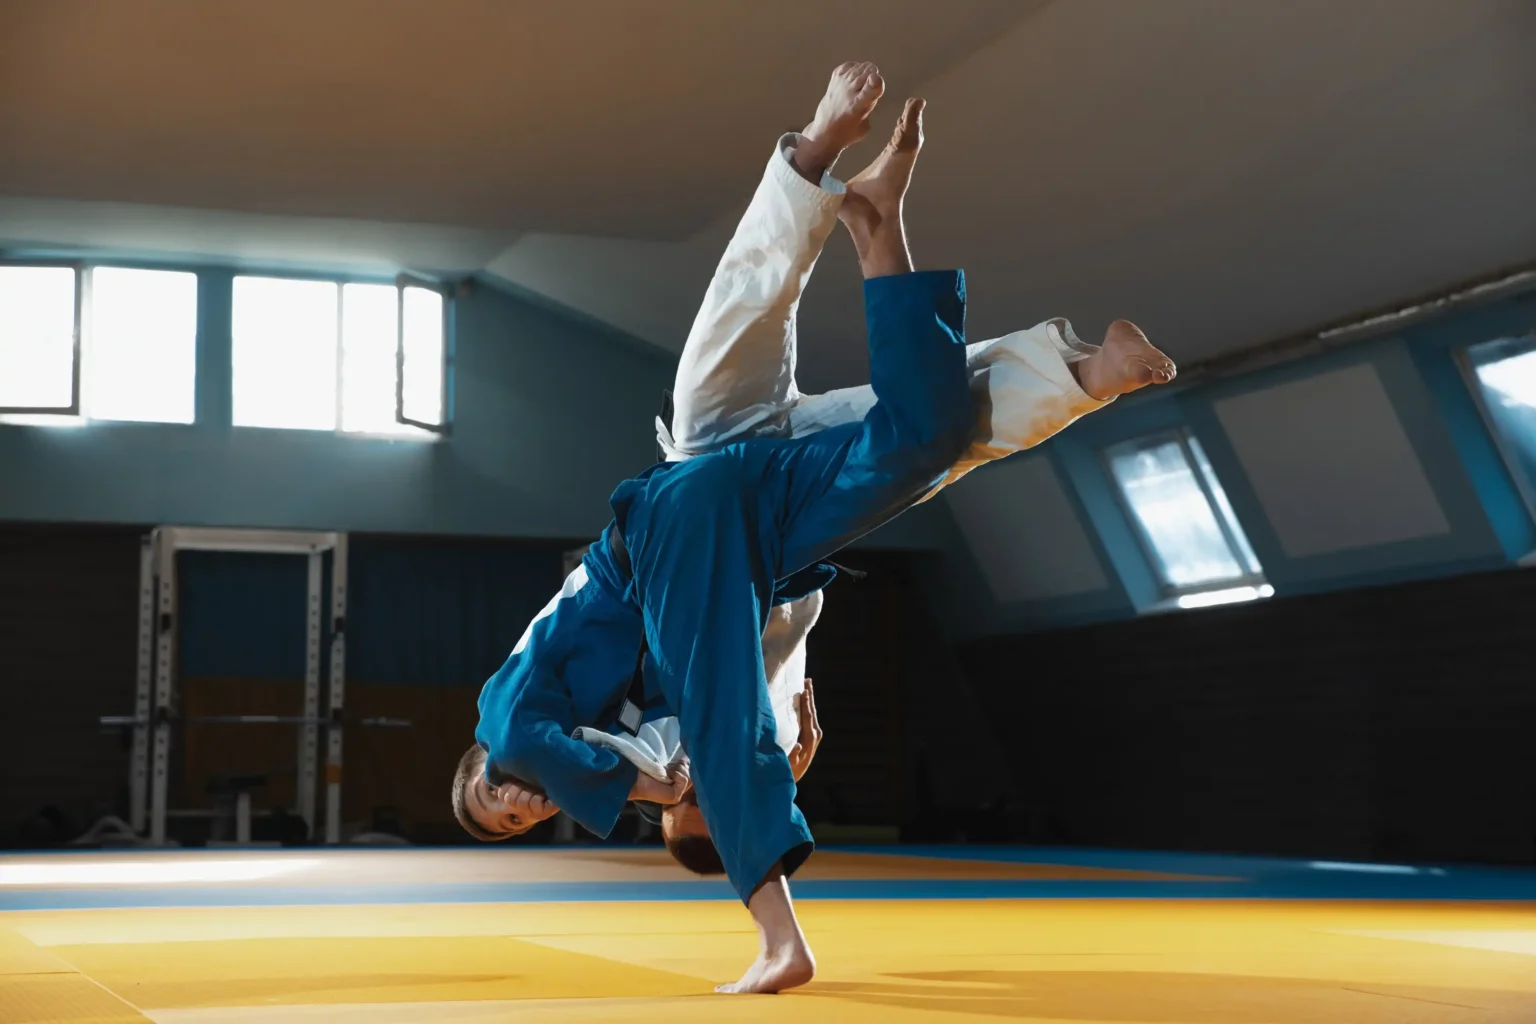 two-young-judo-fighters-kimono-training-martial-arts-gym-with-expression-action-motion (Web H)